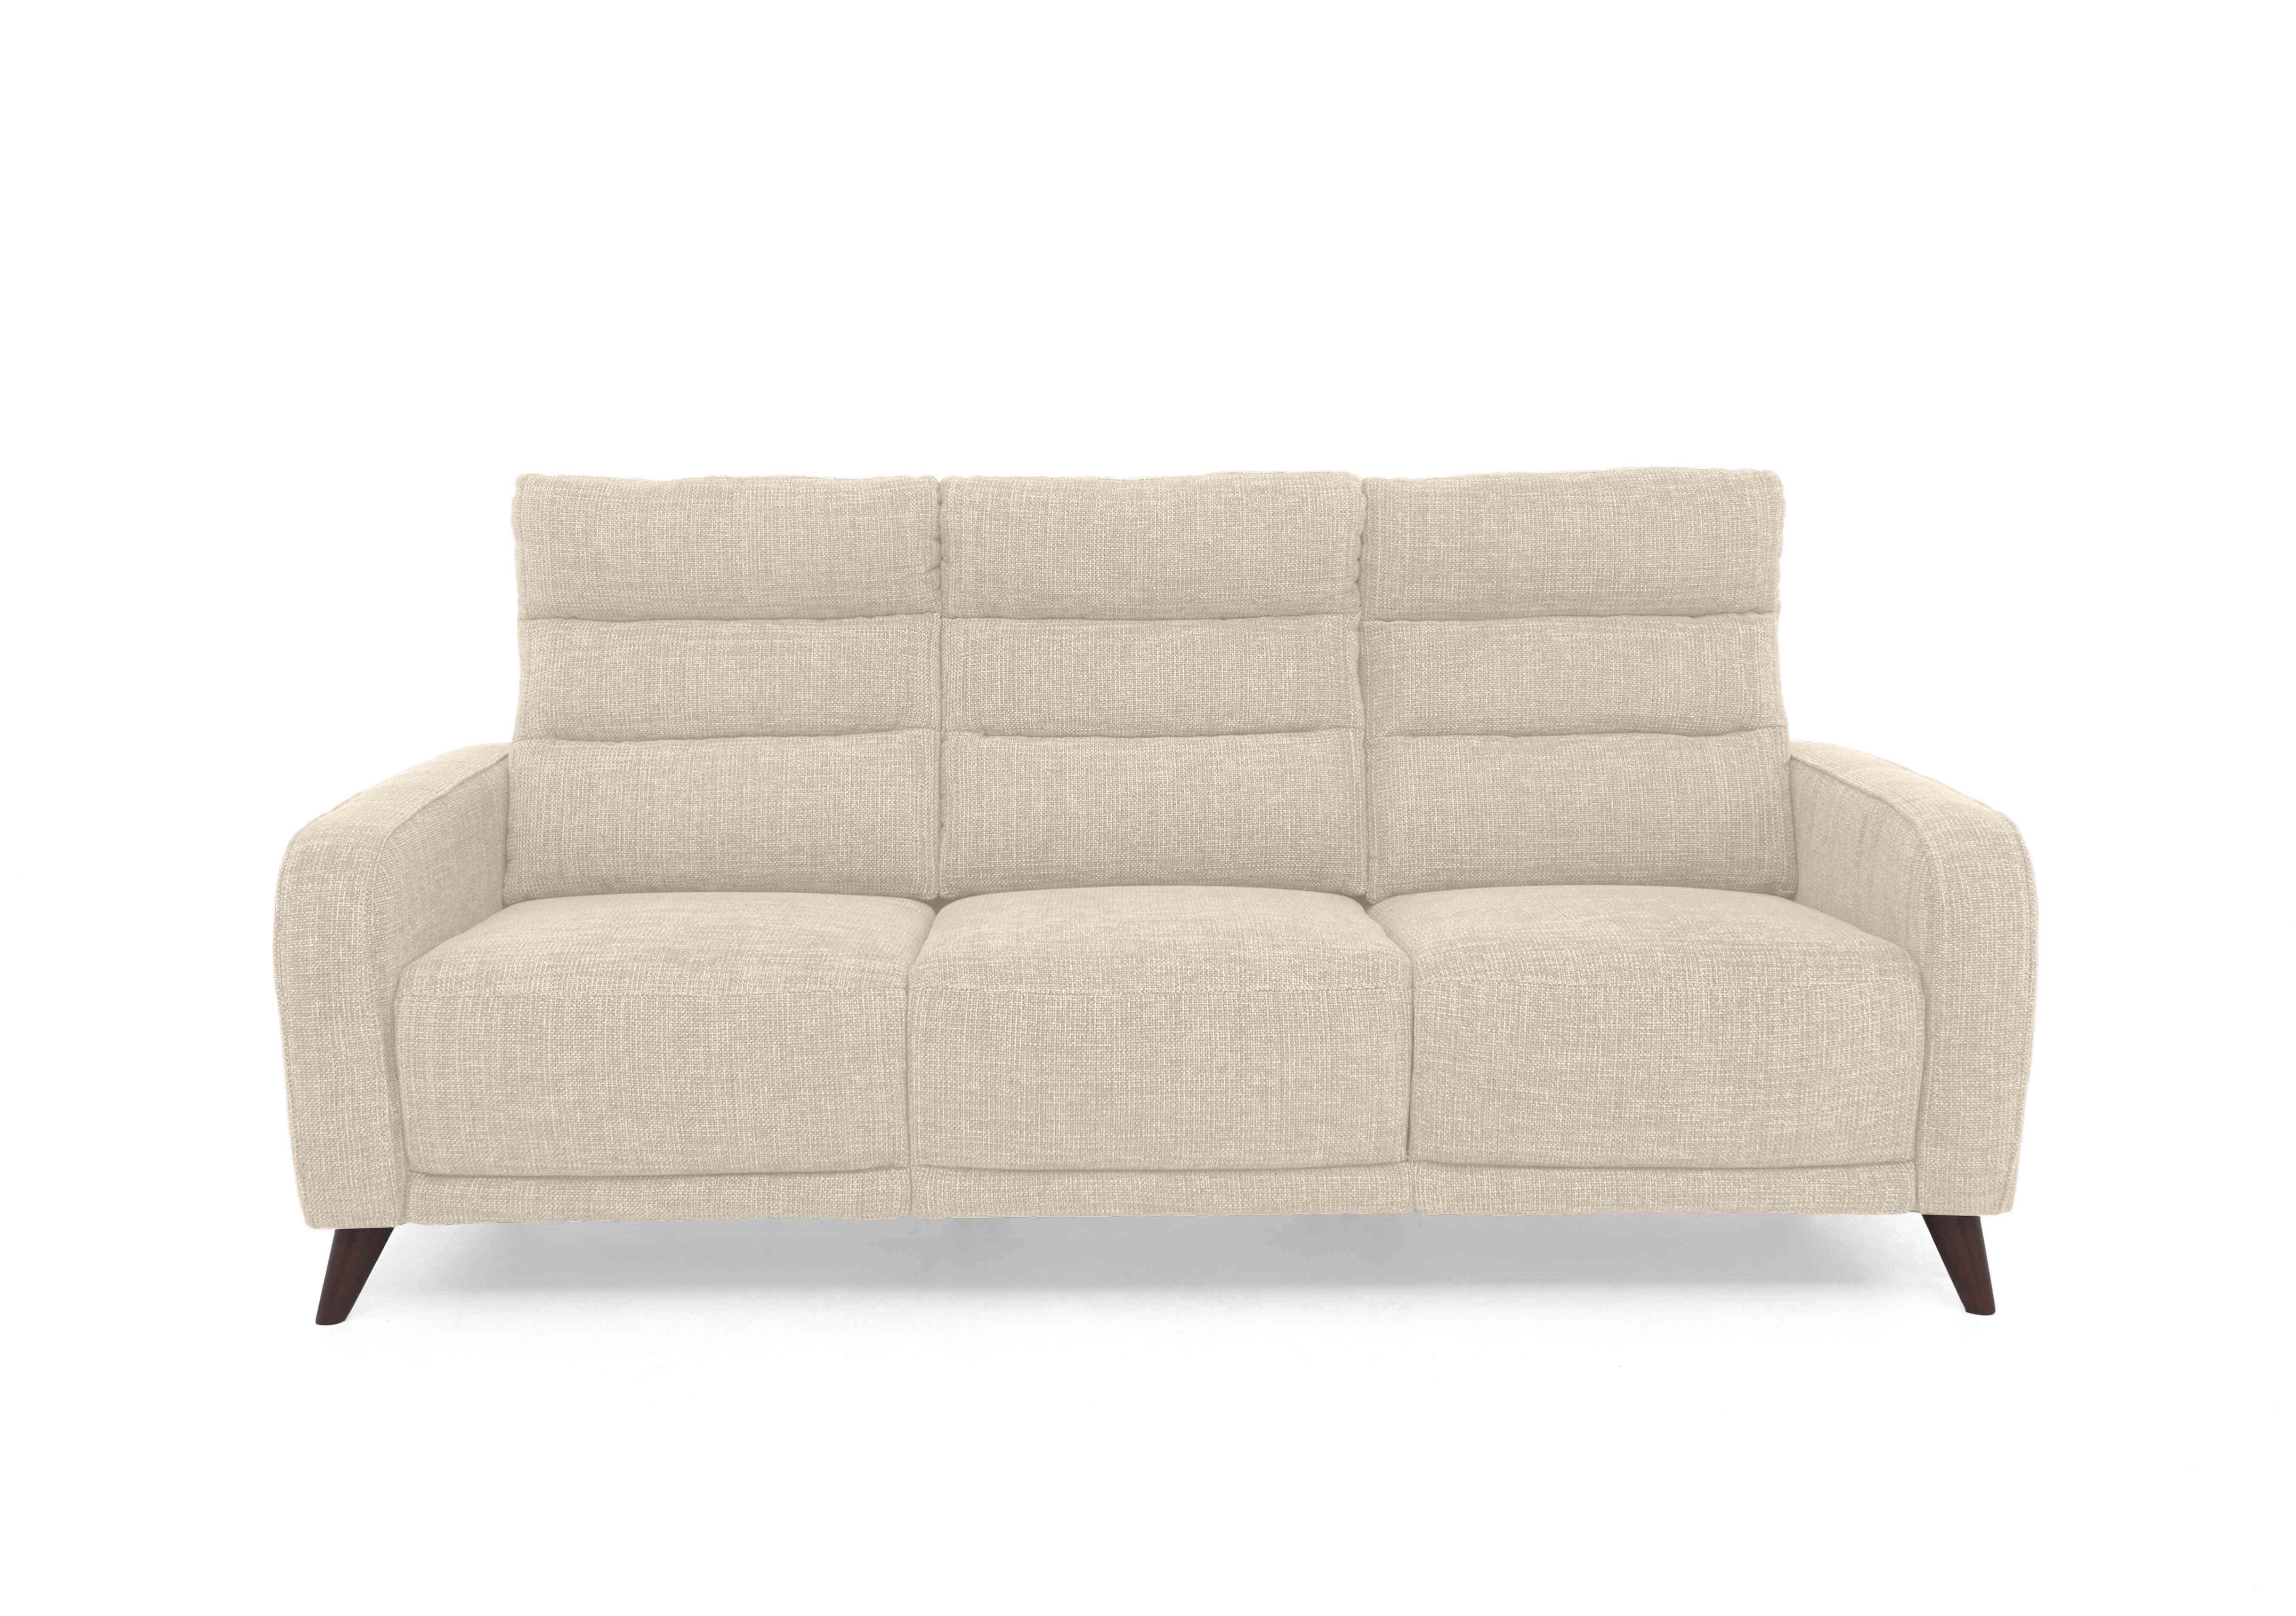 Quinn 3 Seater Fabric Sofa in We-0101 Weave Oatmeal on Furniture Village